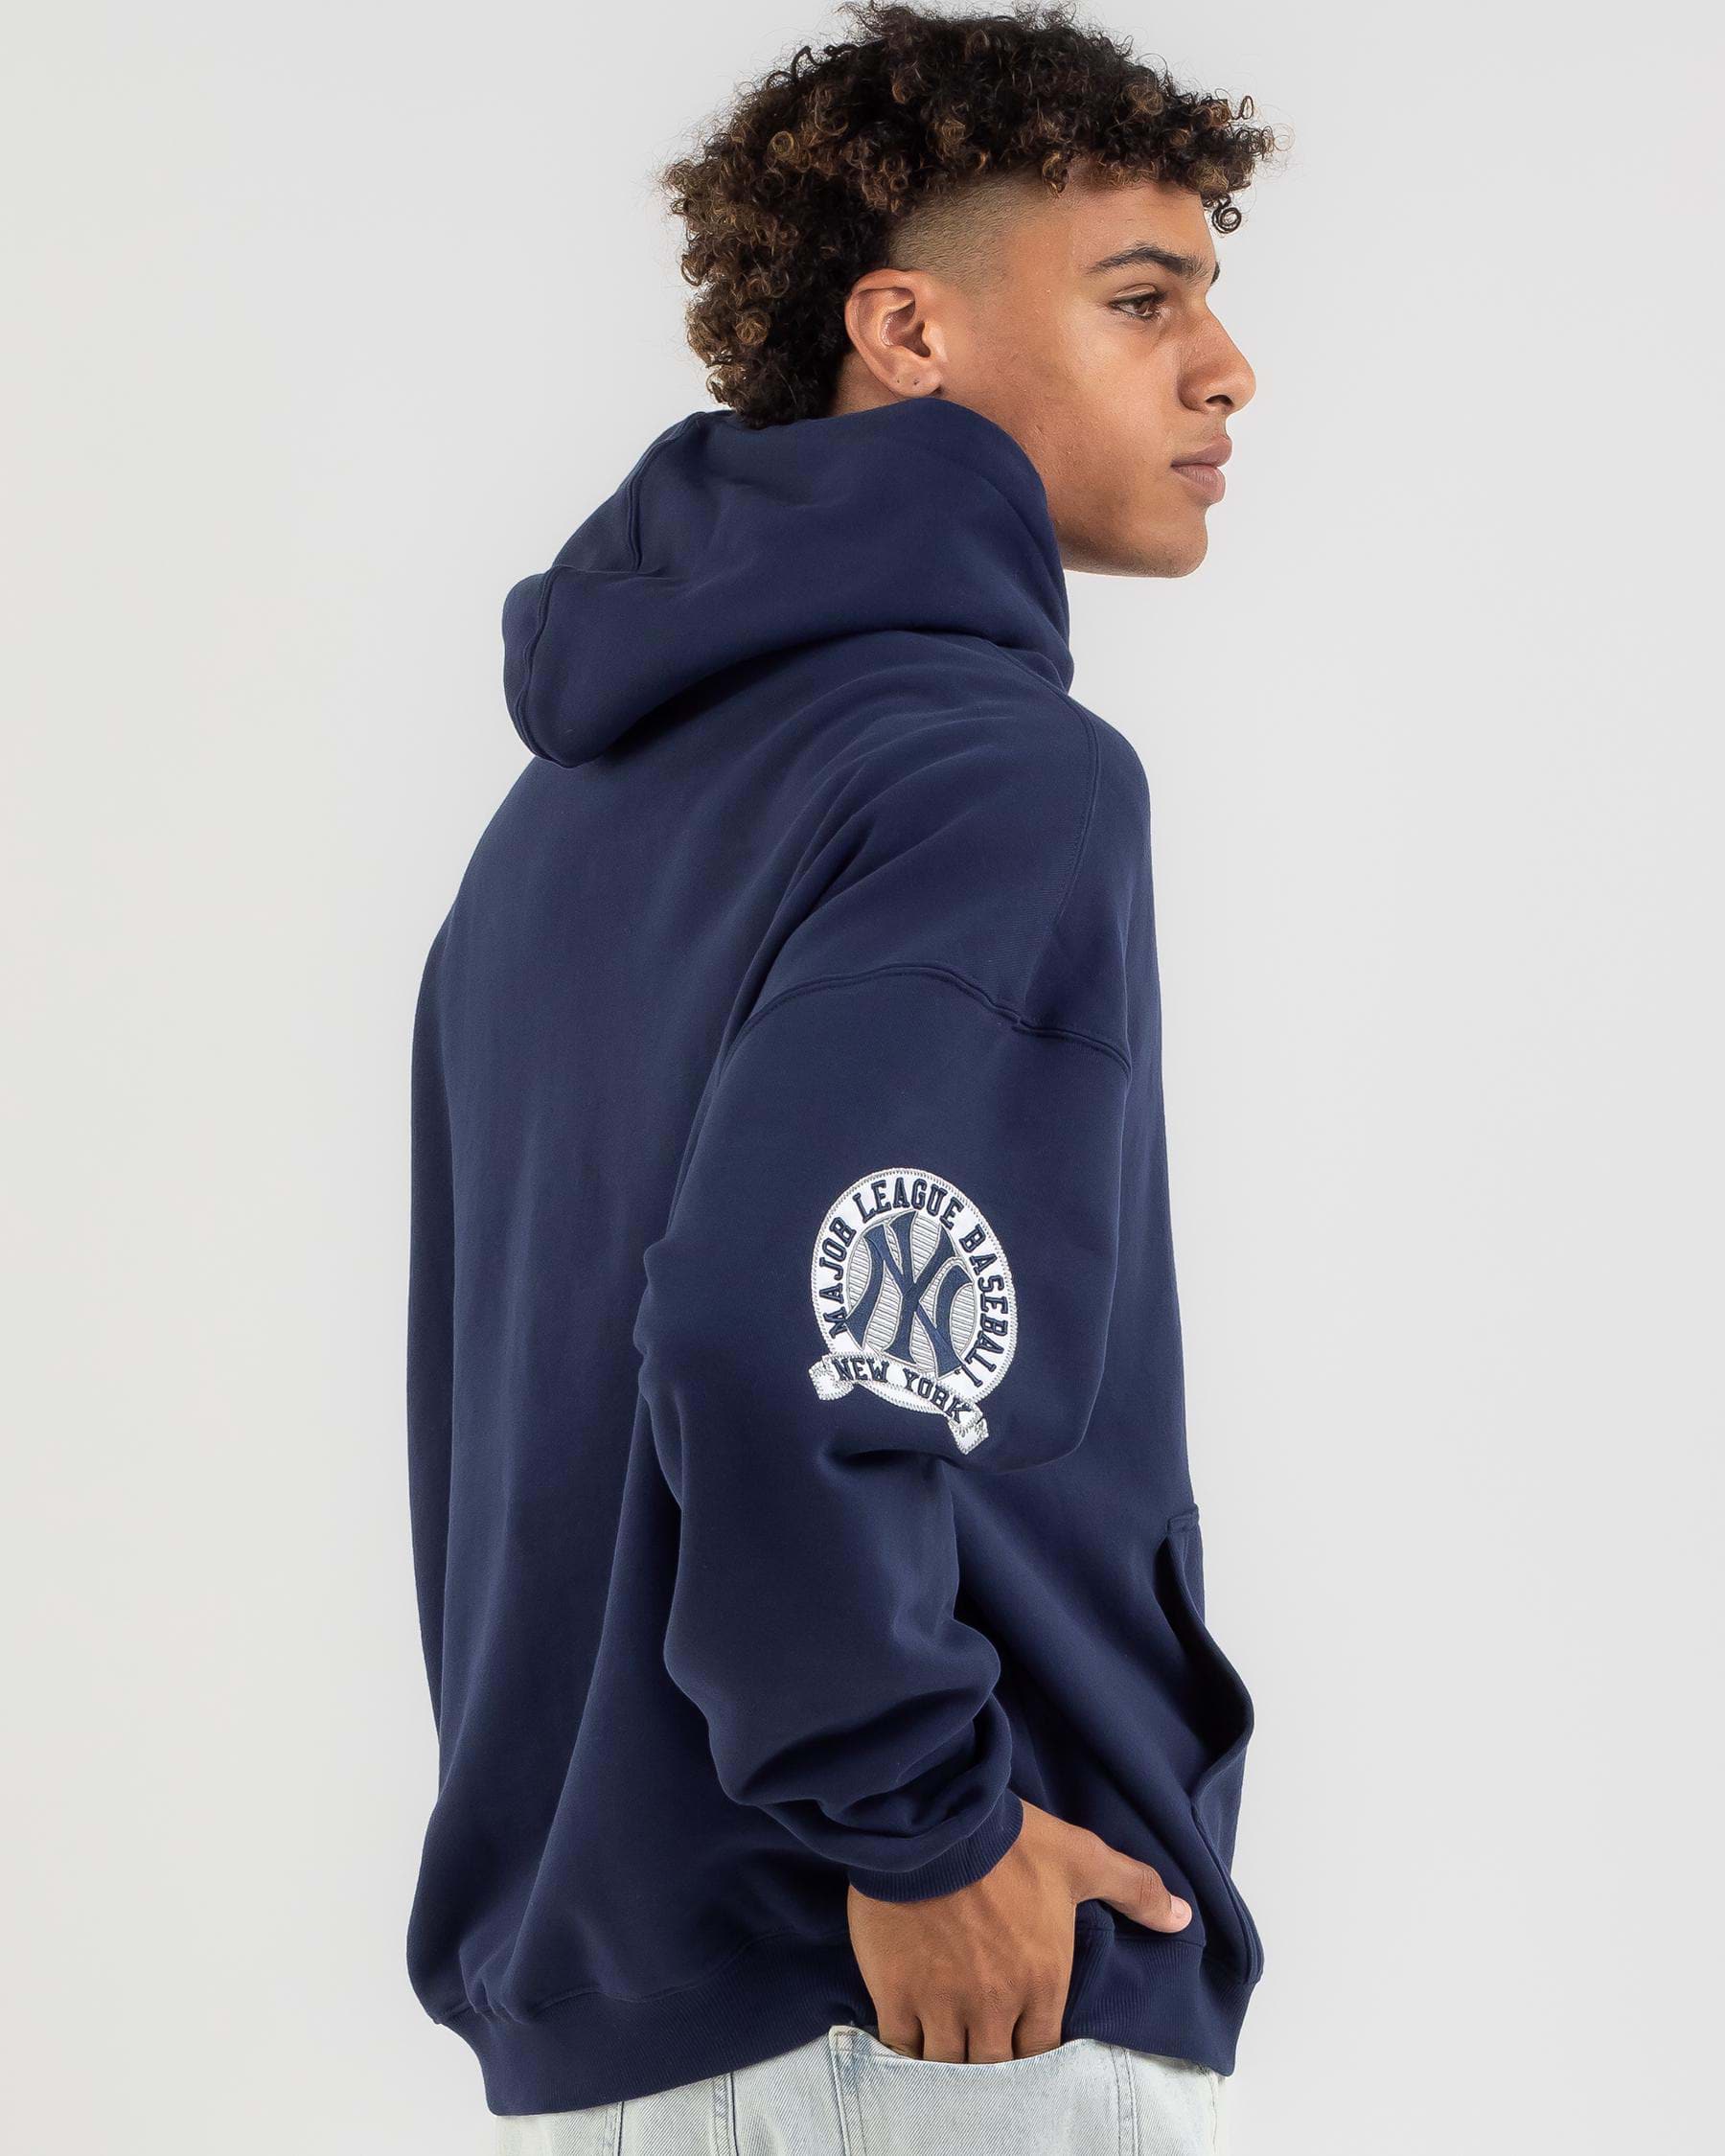 Majestic NY Yankees Hoodie In Midnight Blue - FREE* Shipping & Easy Returns  - City Beach United States